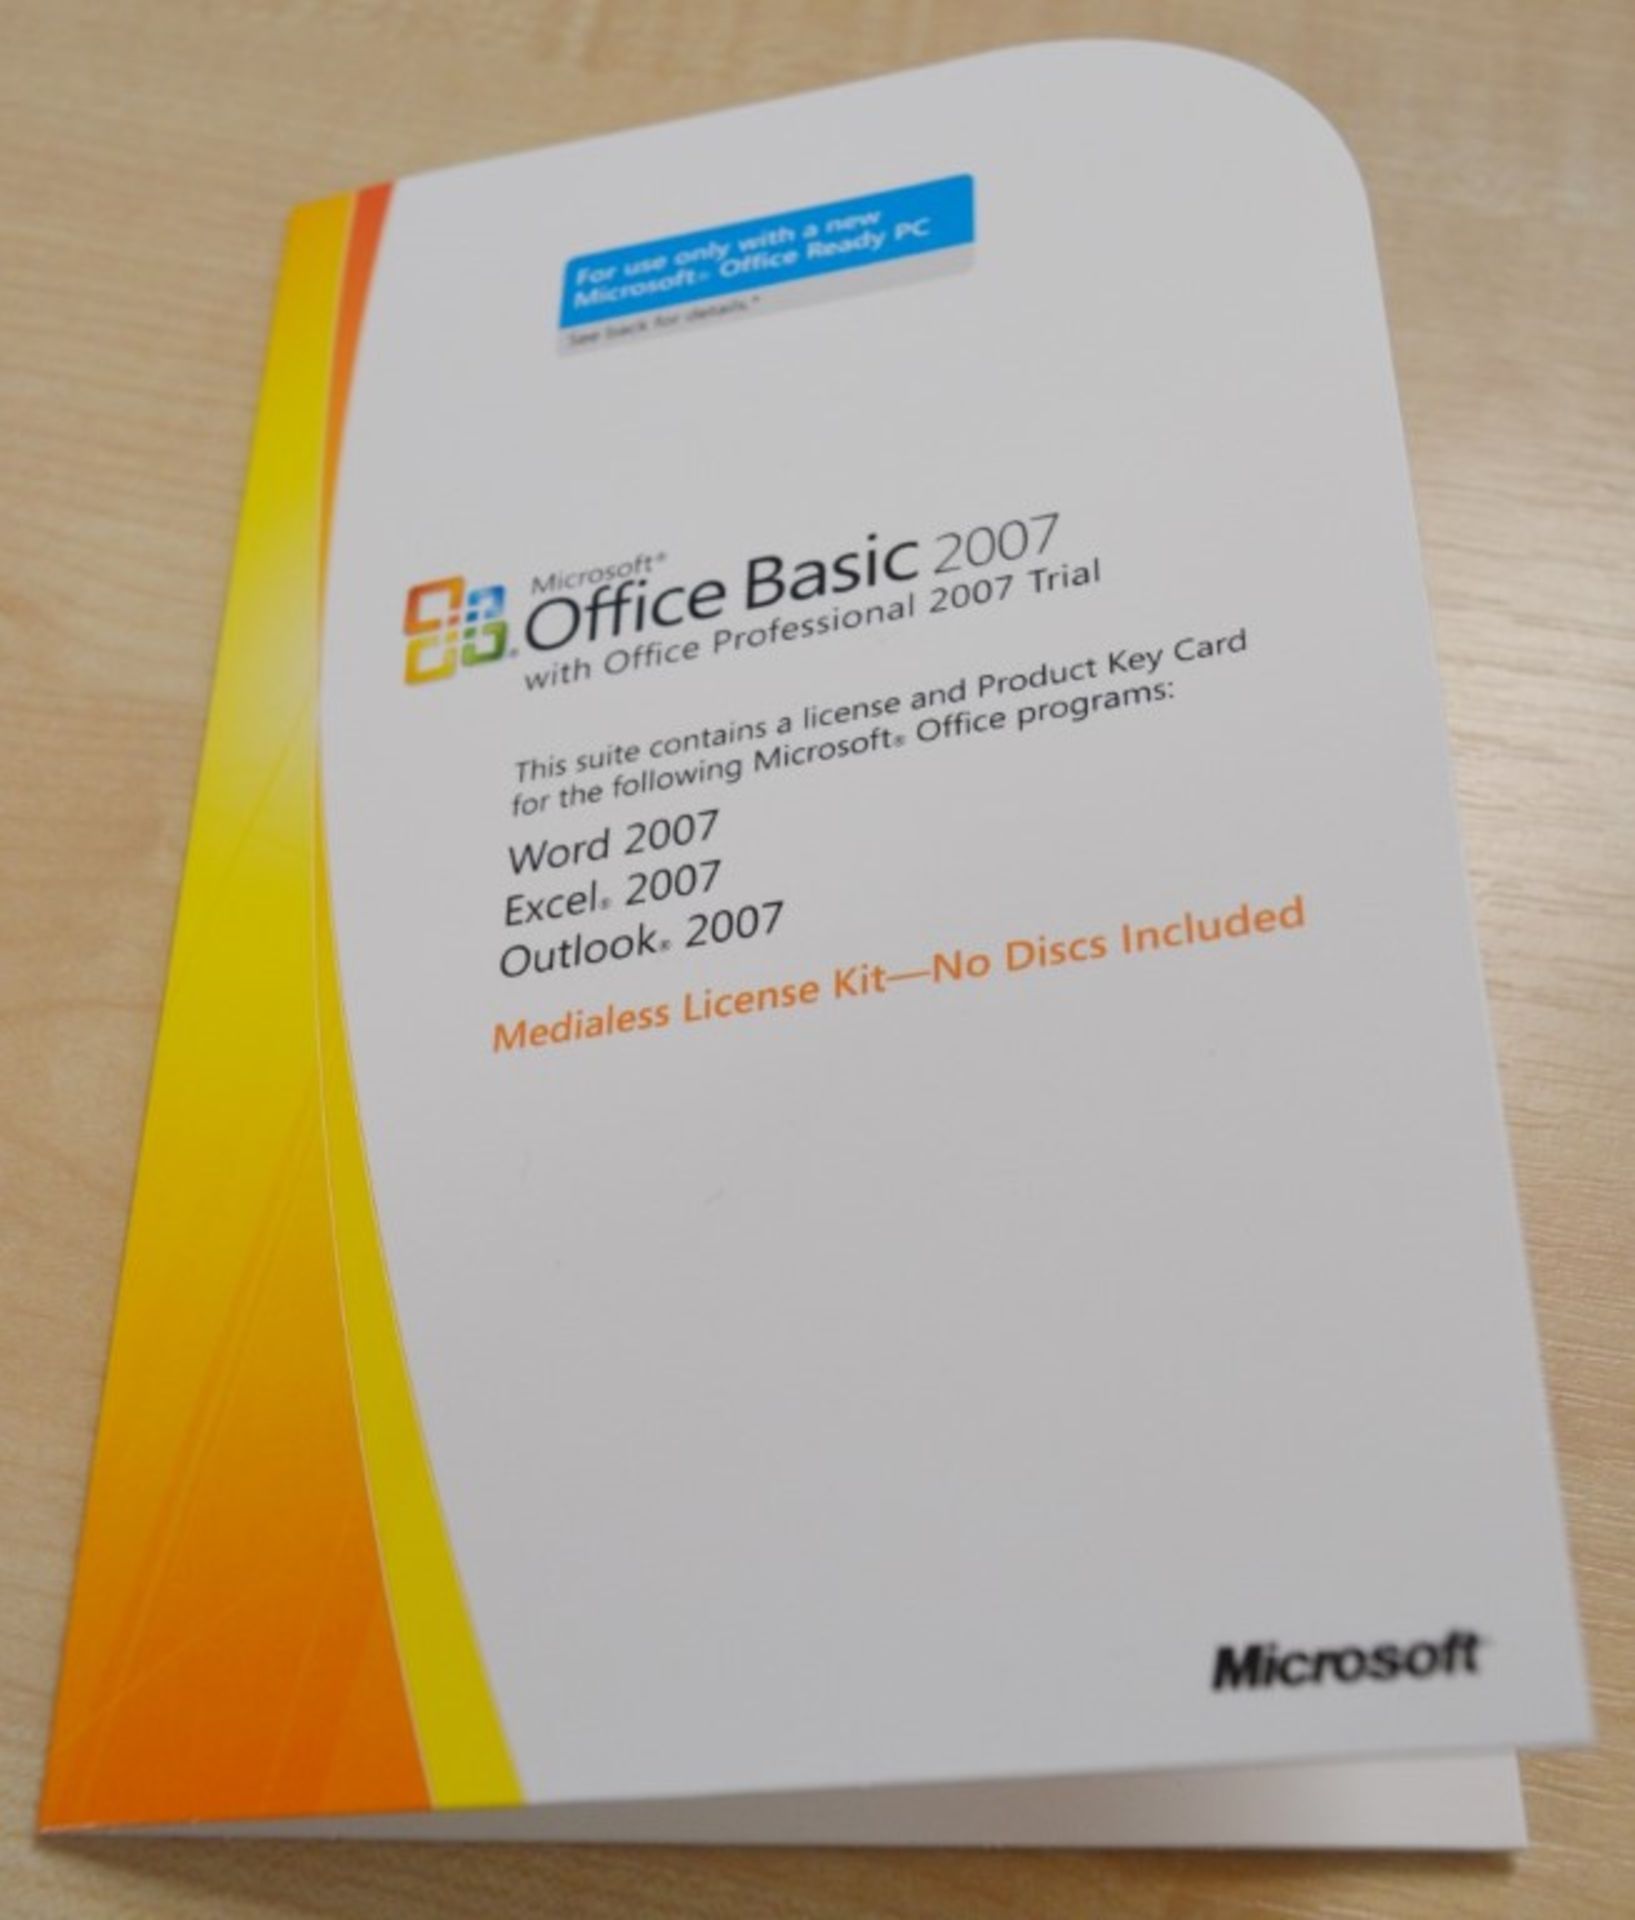 1 x Microsoft Office 2007 Basic COA - Features Word, Excel and Outlook - CL300 - Location: